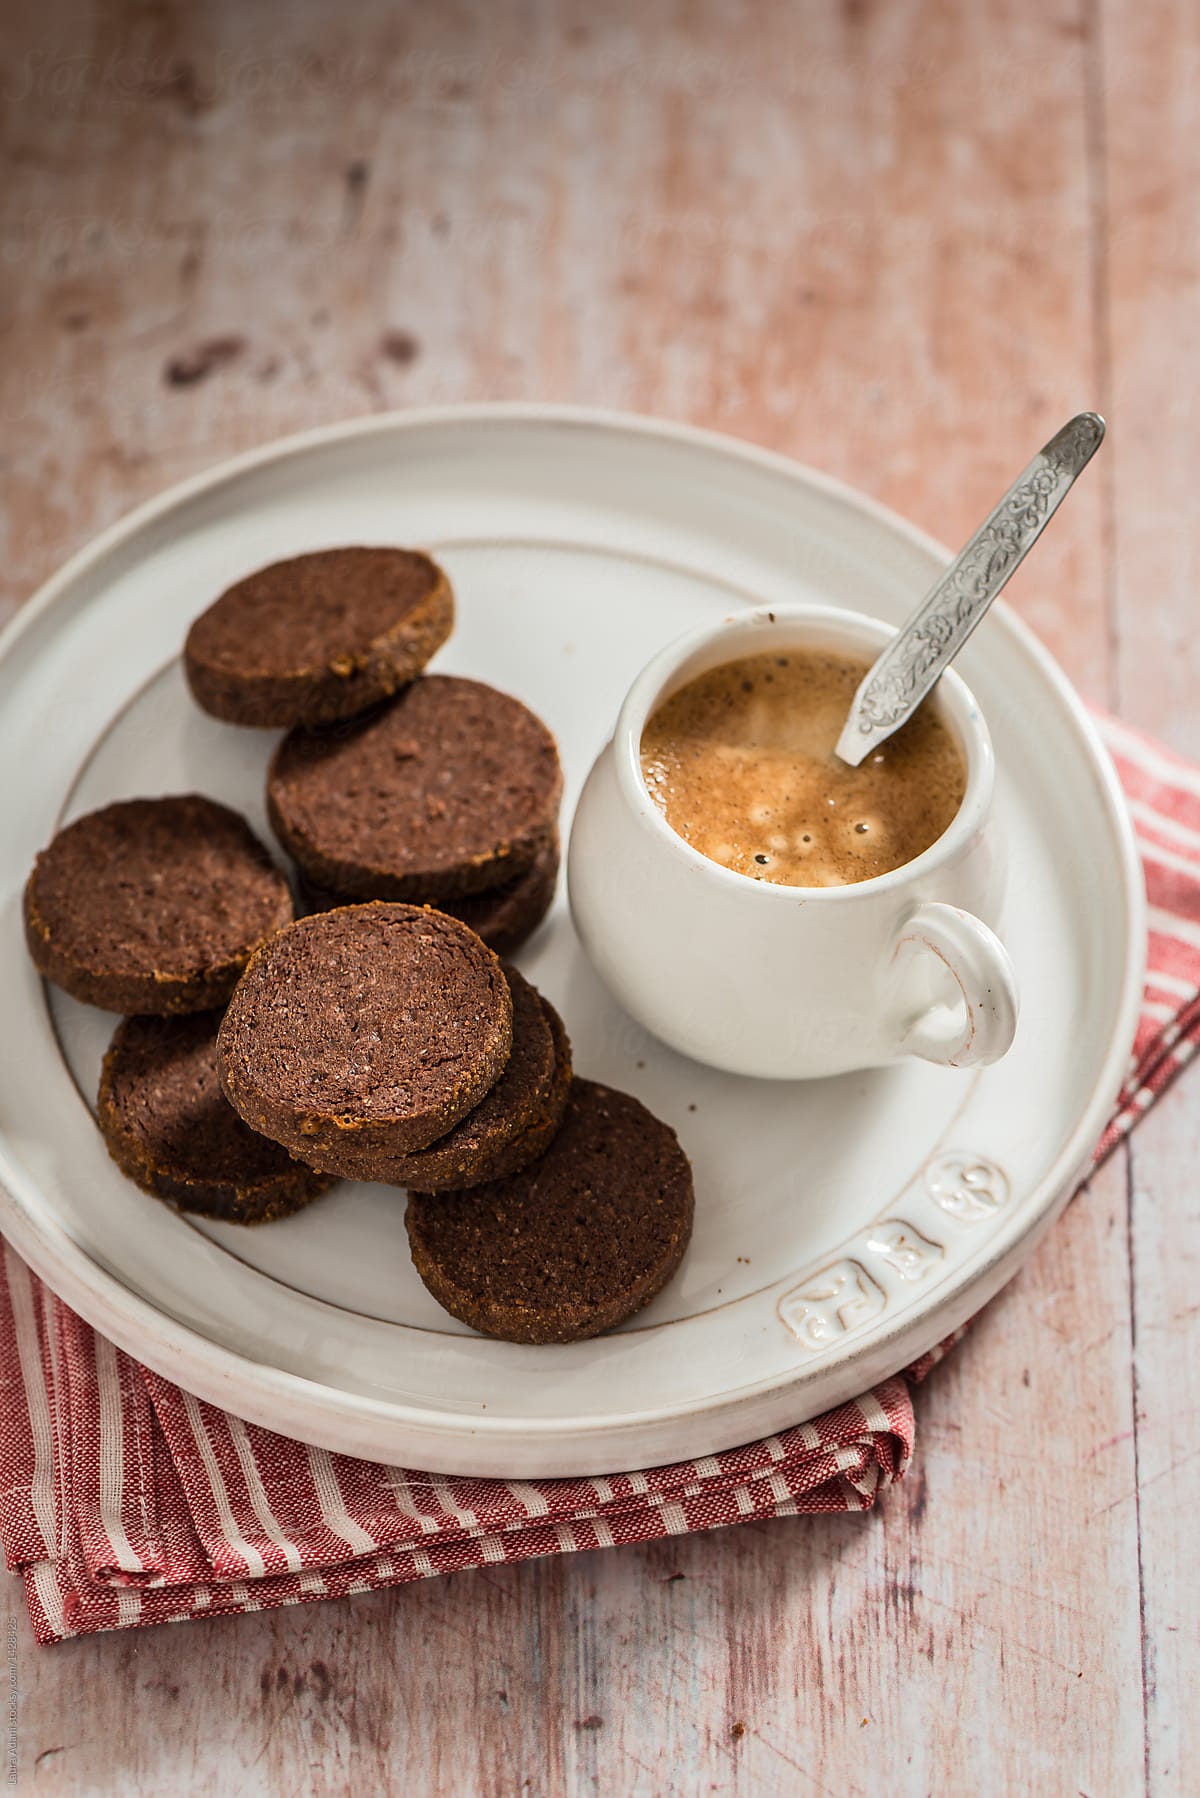 Cocoa biscuits and a cup of coffee